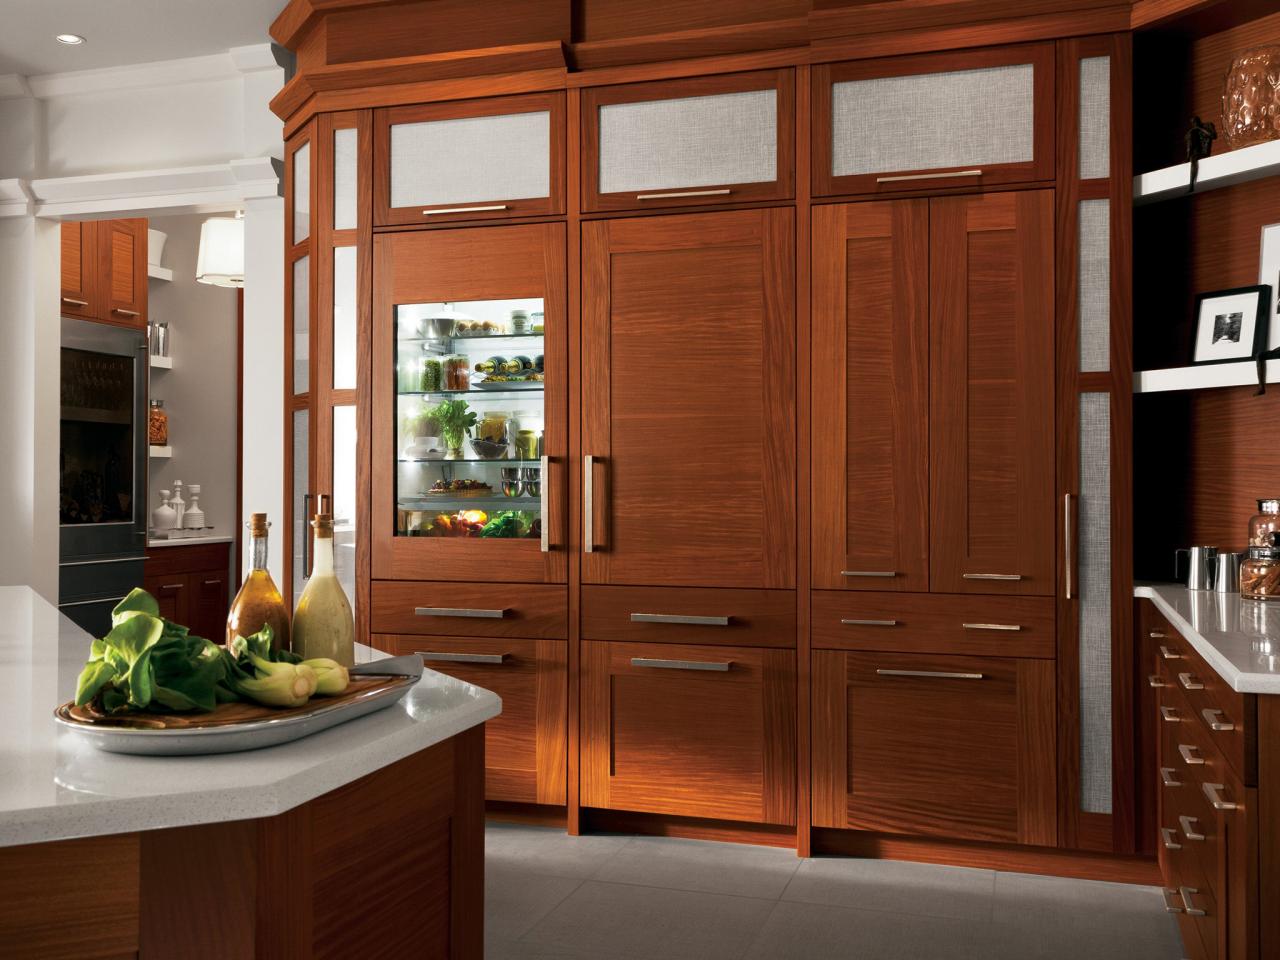 Custom Kitchen Cabinets Pictures, Are Custom Cabinets More Expensive